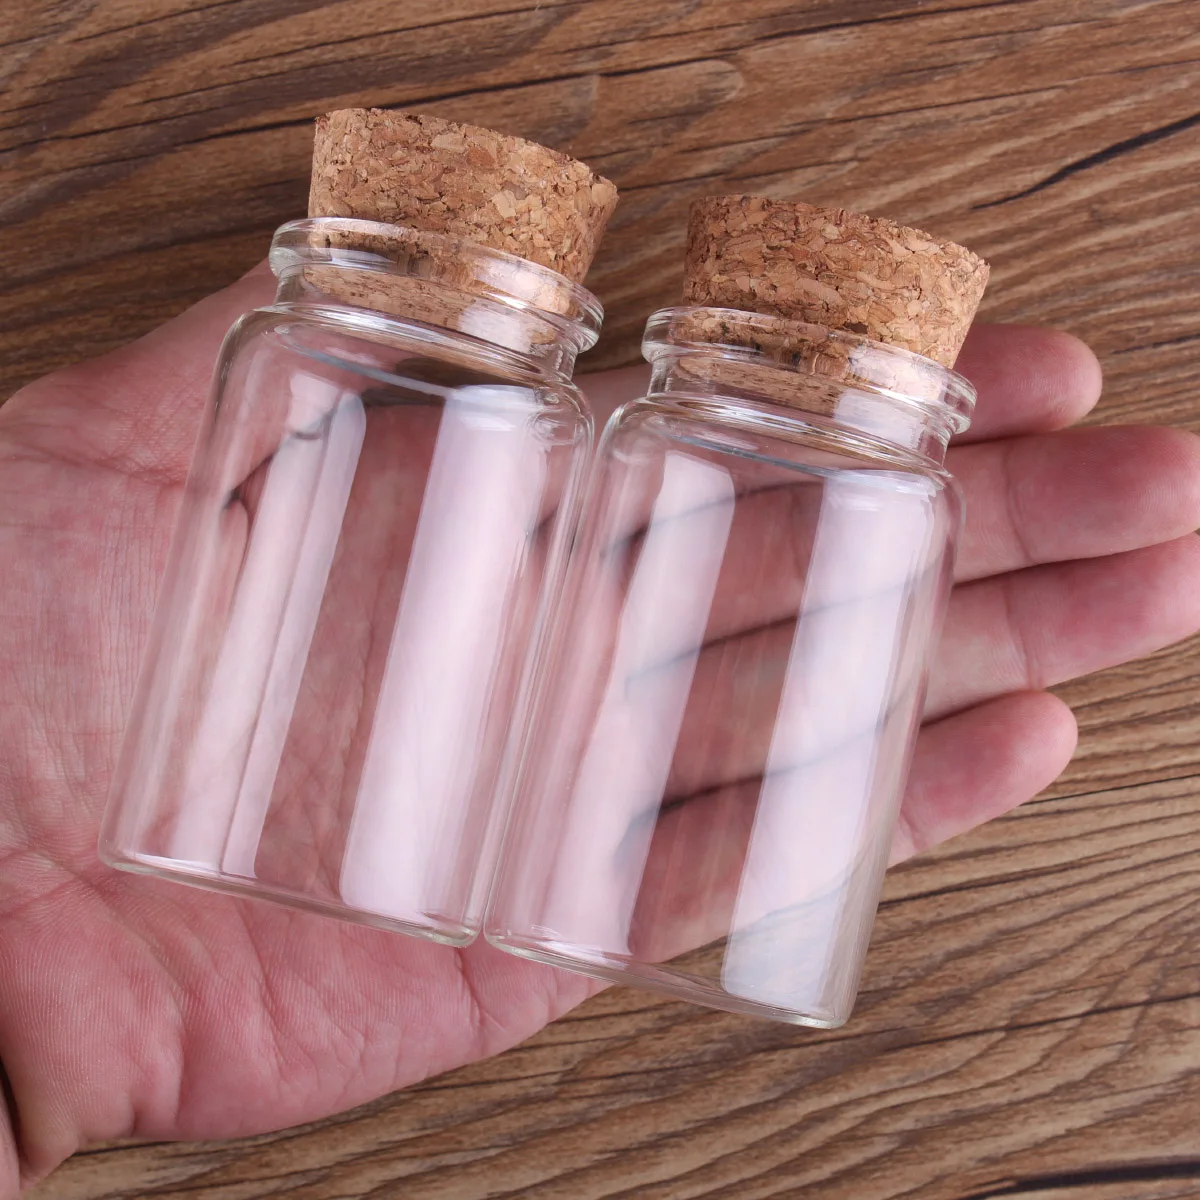 2pcs 100ml 47*80mm Glass Bottles with Cork Lids Spice Jars Containers Glass Vessels Candy Wishing Bottles for Wedding Favors